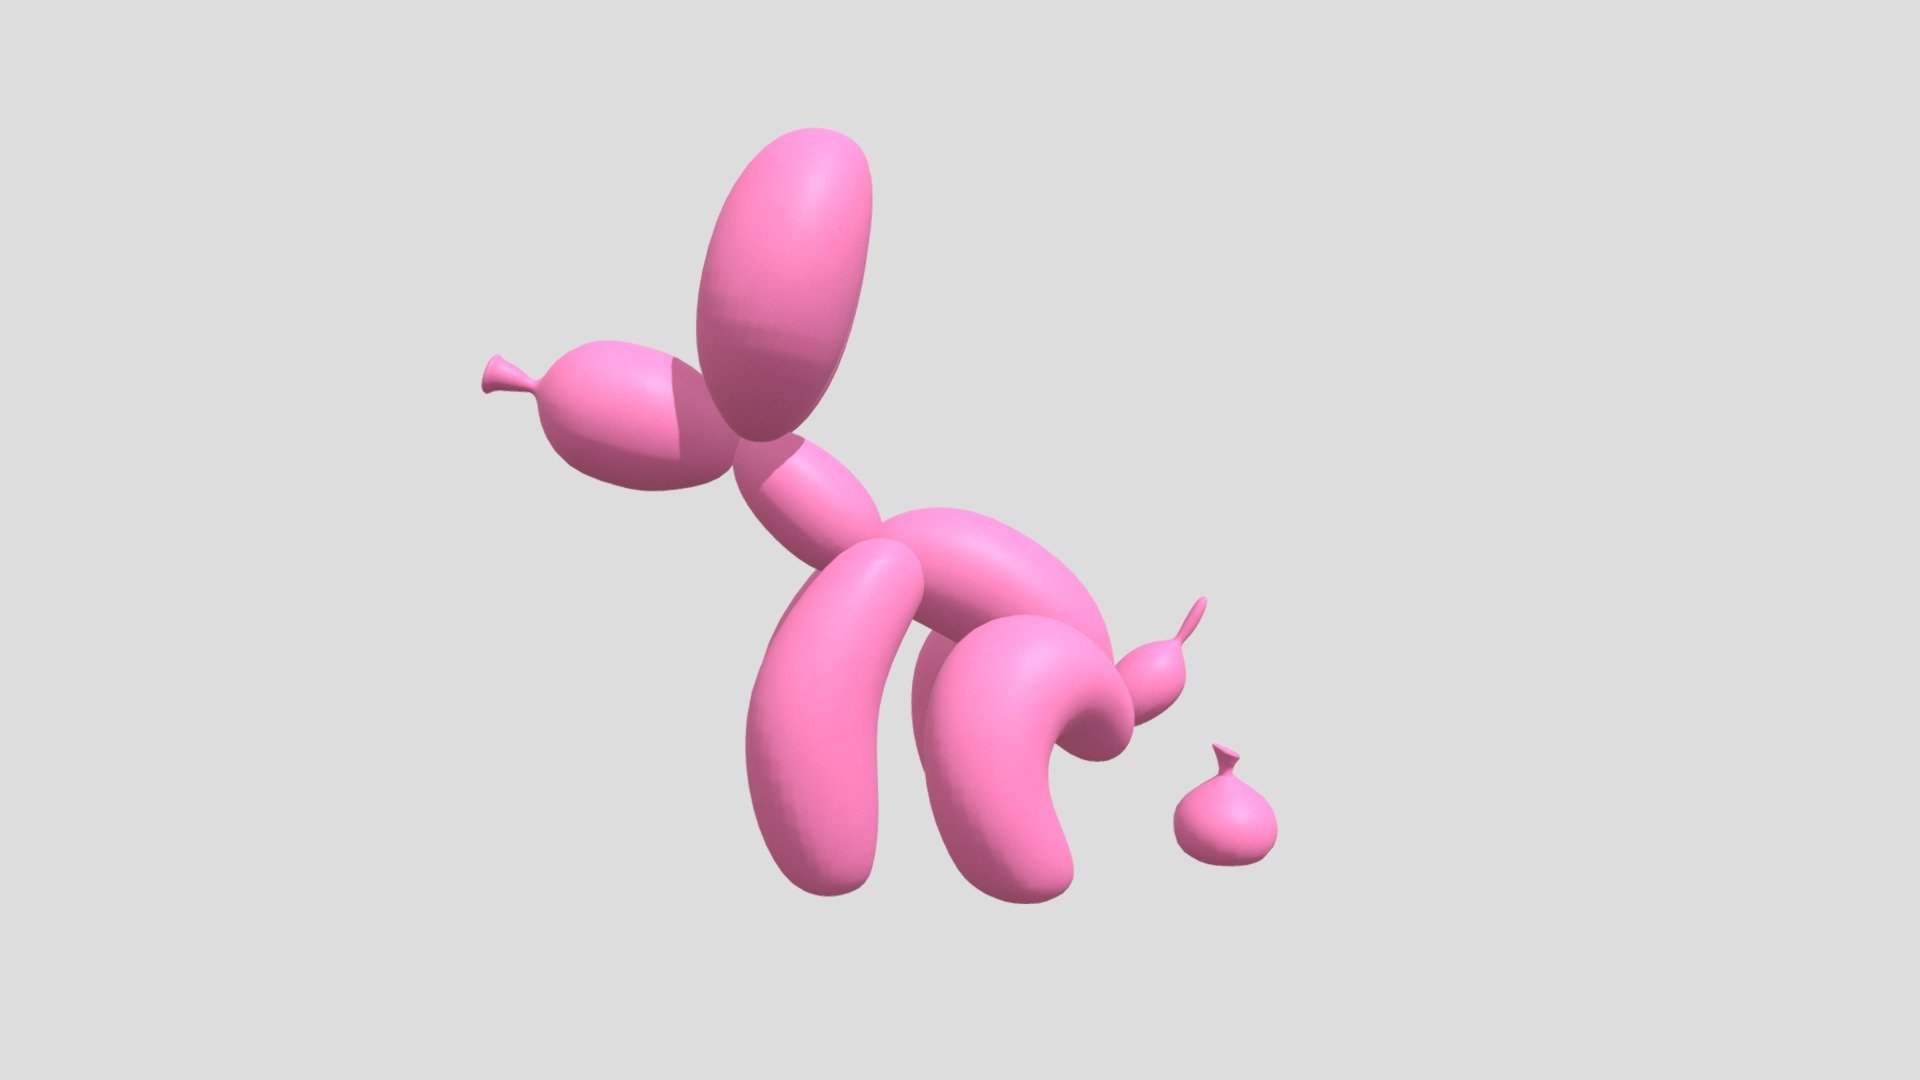 Cute Looking Balloon Dog Pooping designed using all quad topology, subdivision suitable 3d model